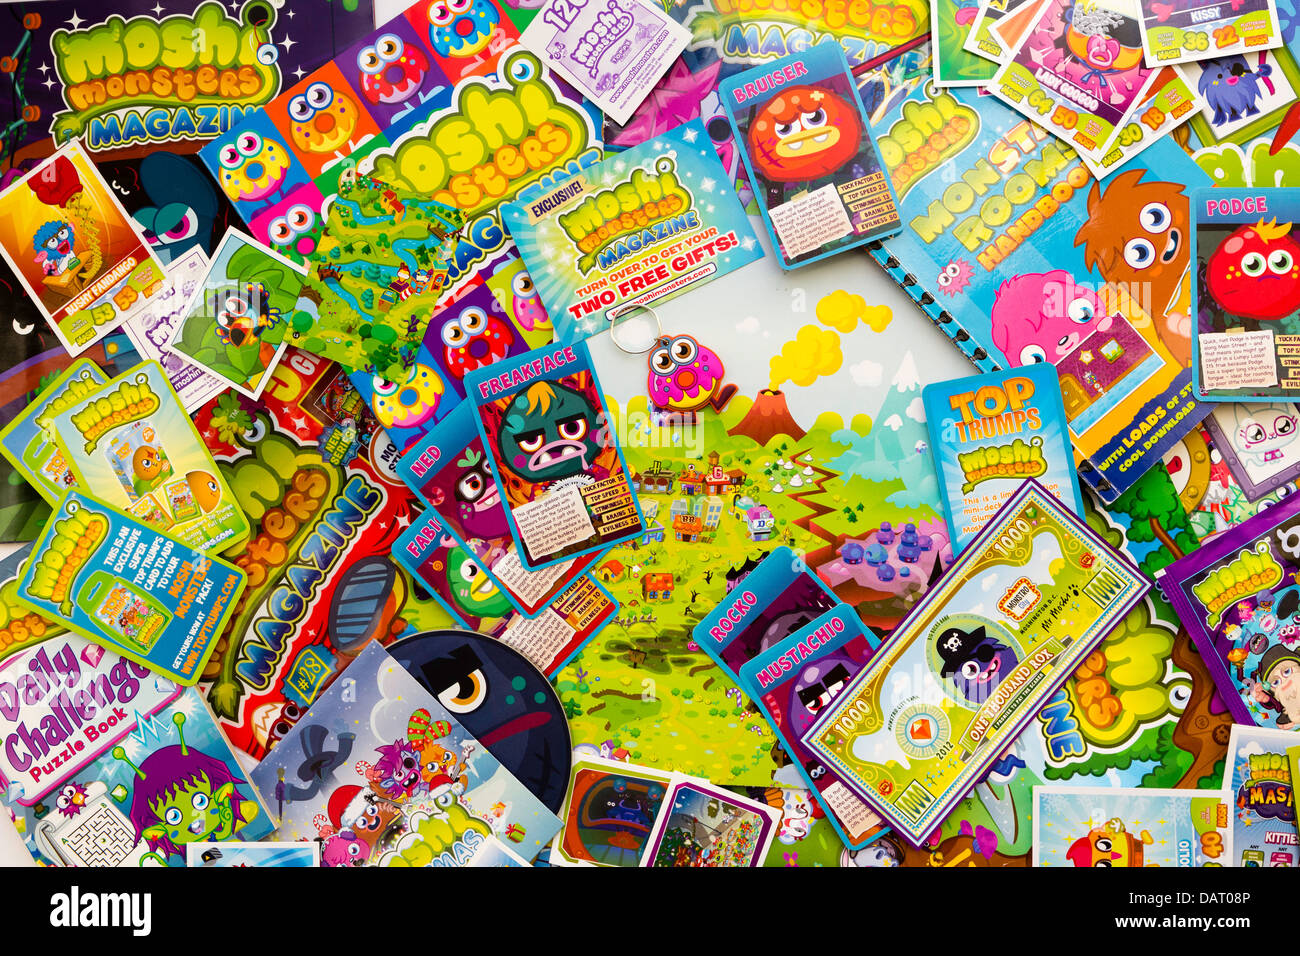 Overhead view of a collection of various children's popular Moshi Monsters comics, trading cards and related ephemera scattered on top of each other. Stock Photo